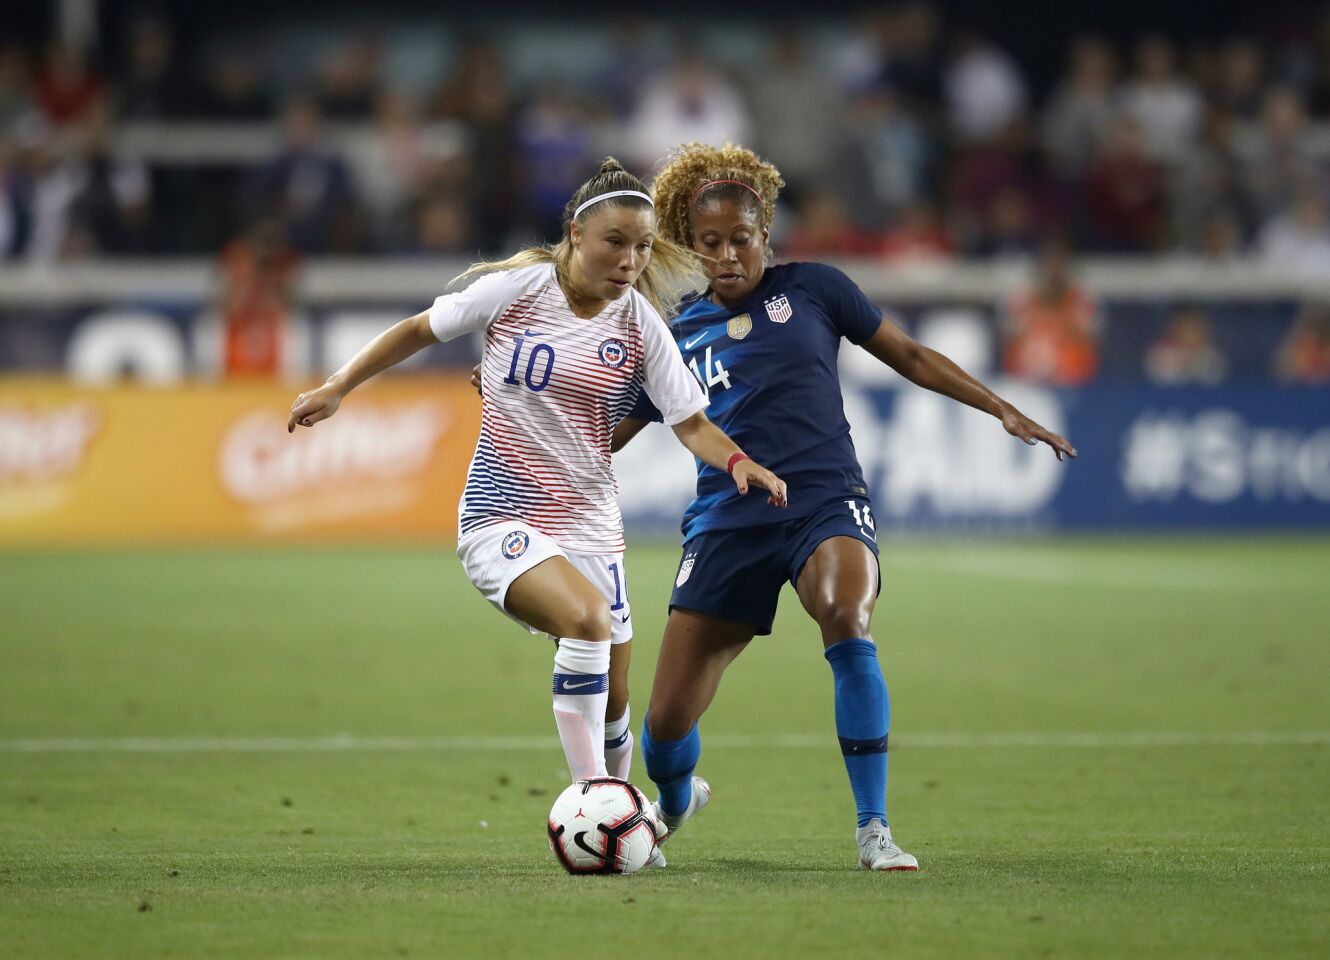 SAN JOSE, CA - SEPTEMBER 04: Yanara Aedo of Chile tries to keep the ball away from Casey Short of the United States during their match at Avaya Stadium on September 4, 2018 in San Jose, California. (Photo by Ezra Shaw/Getty Images) ** OUTS - ELSENT, FPG, CM - OUTS * NM, PH, VA if sourced by CT, LA or MoD **